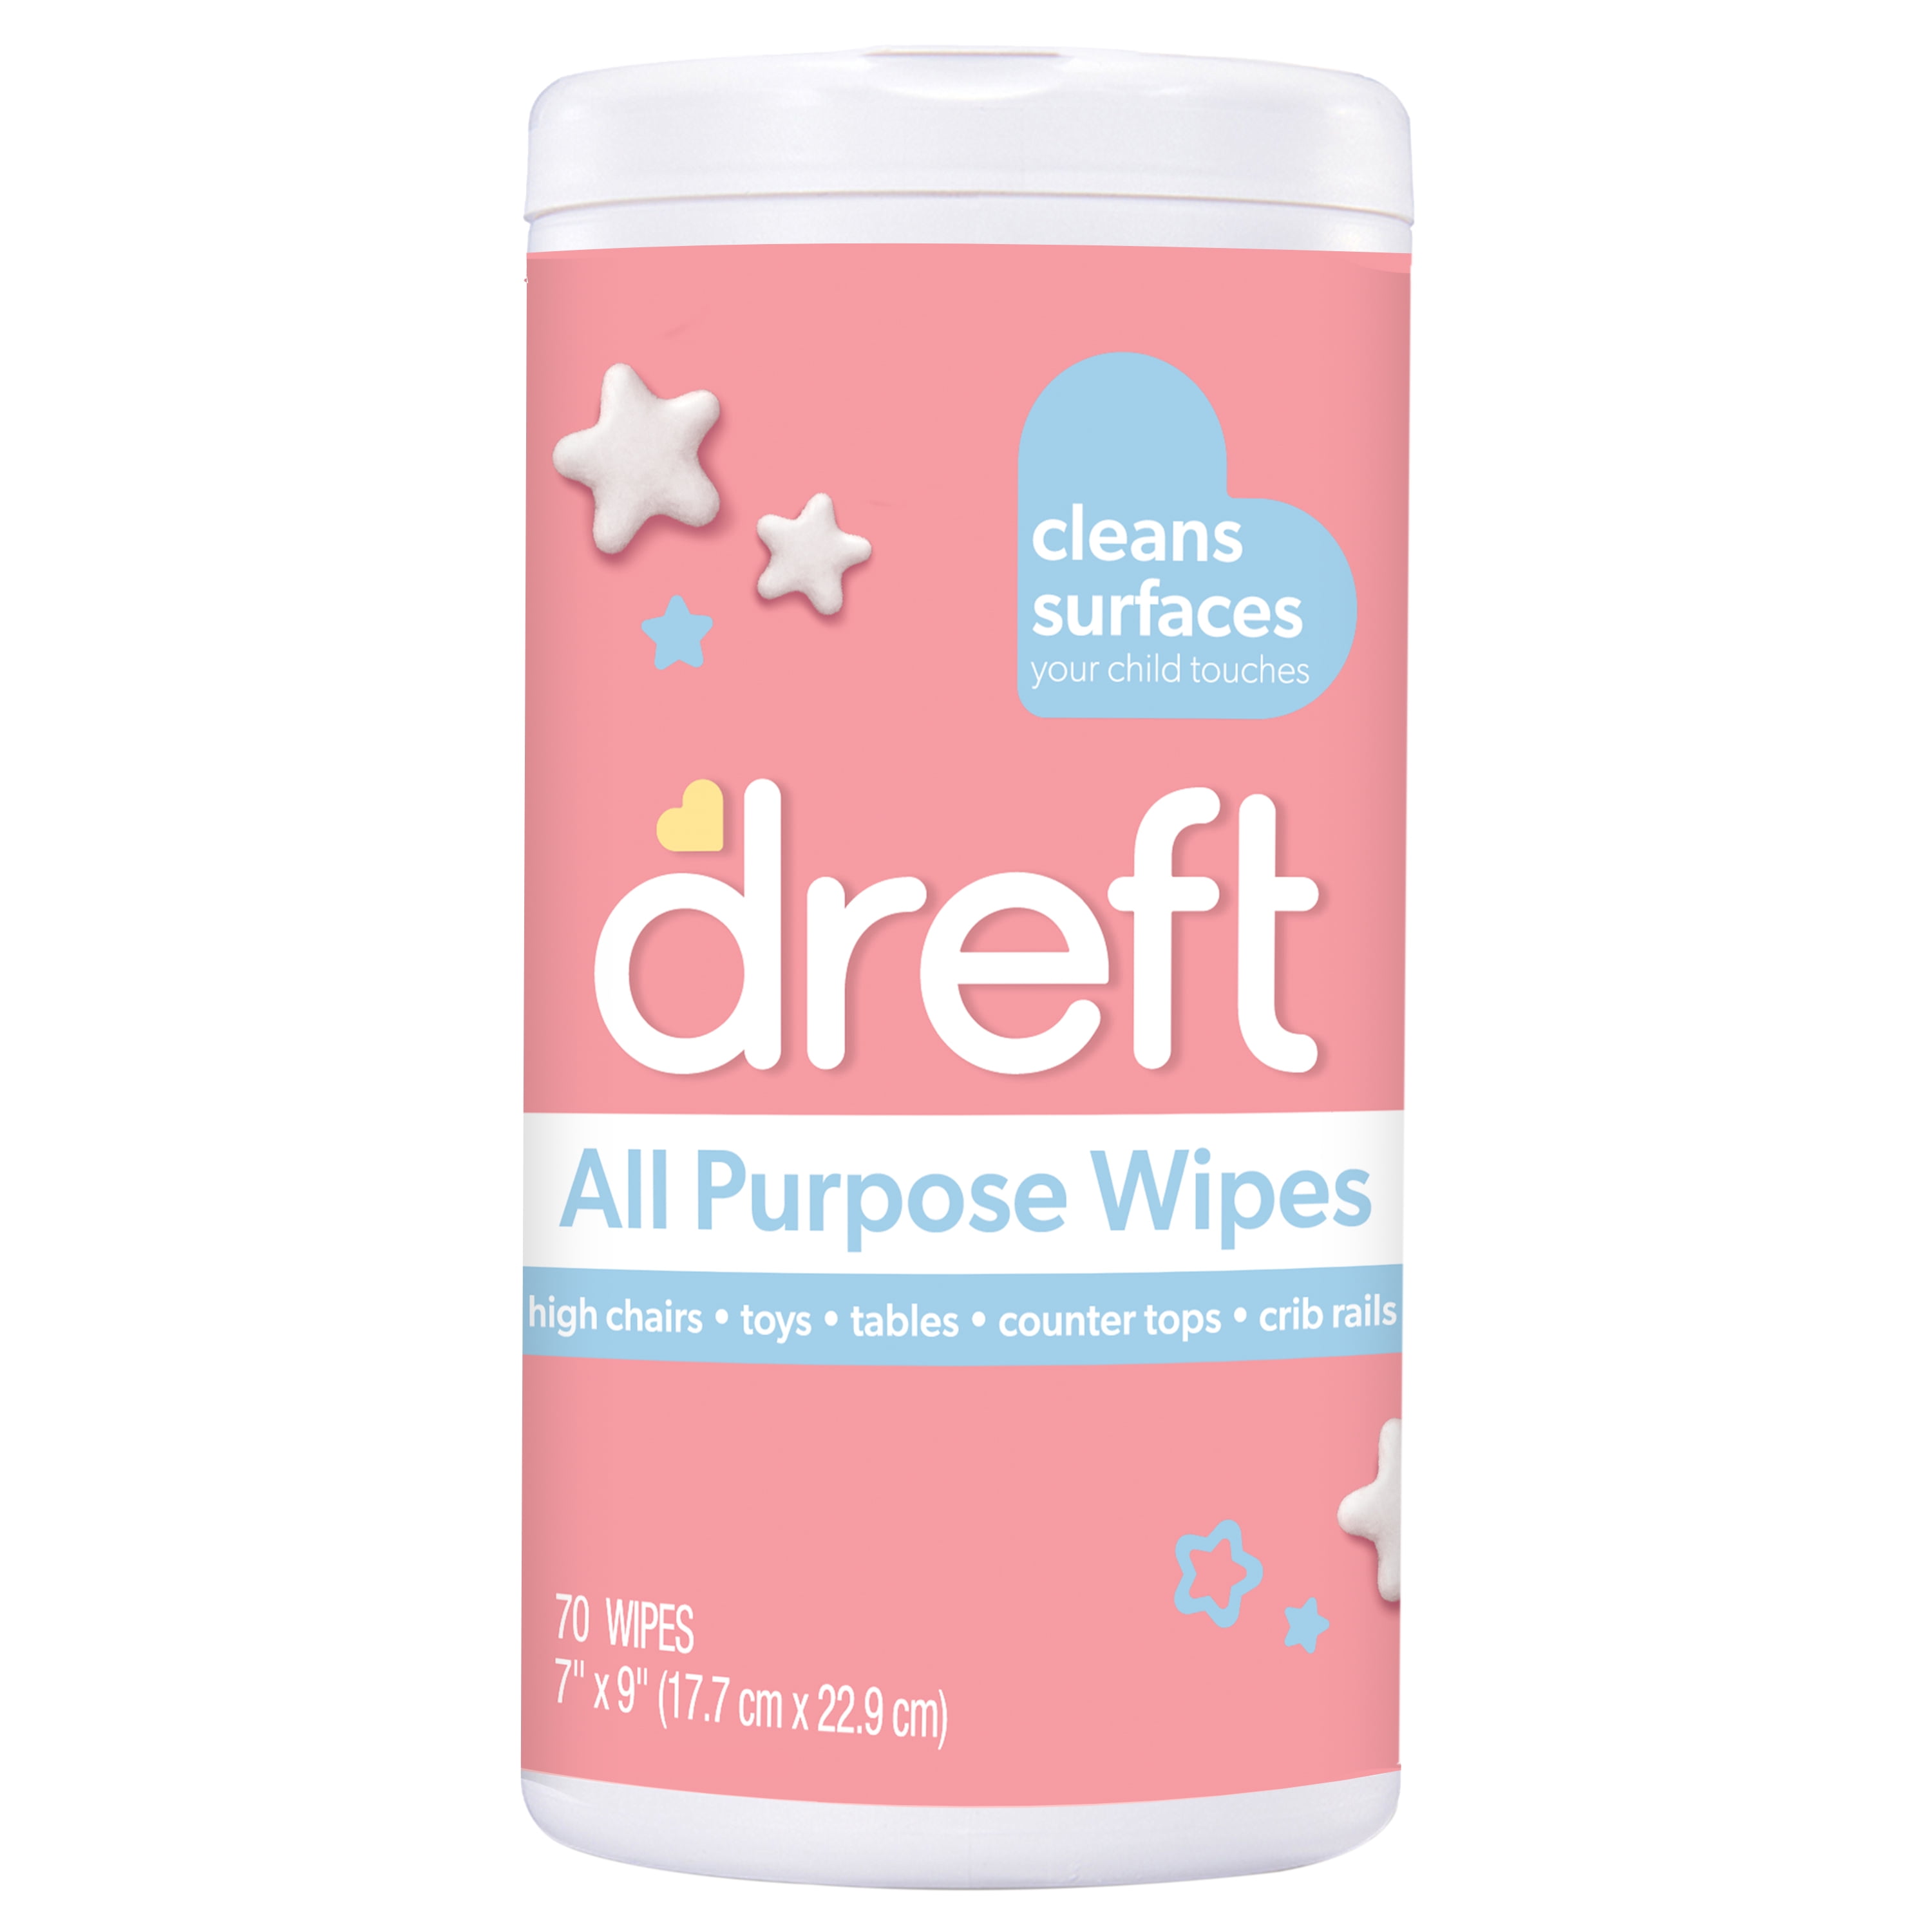 Dreft Wipes, All Purpose - 70 wipes